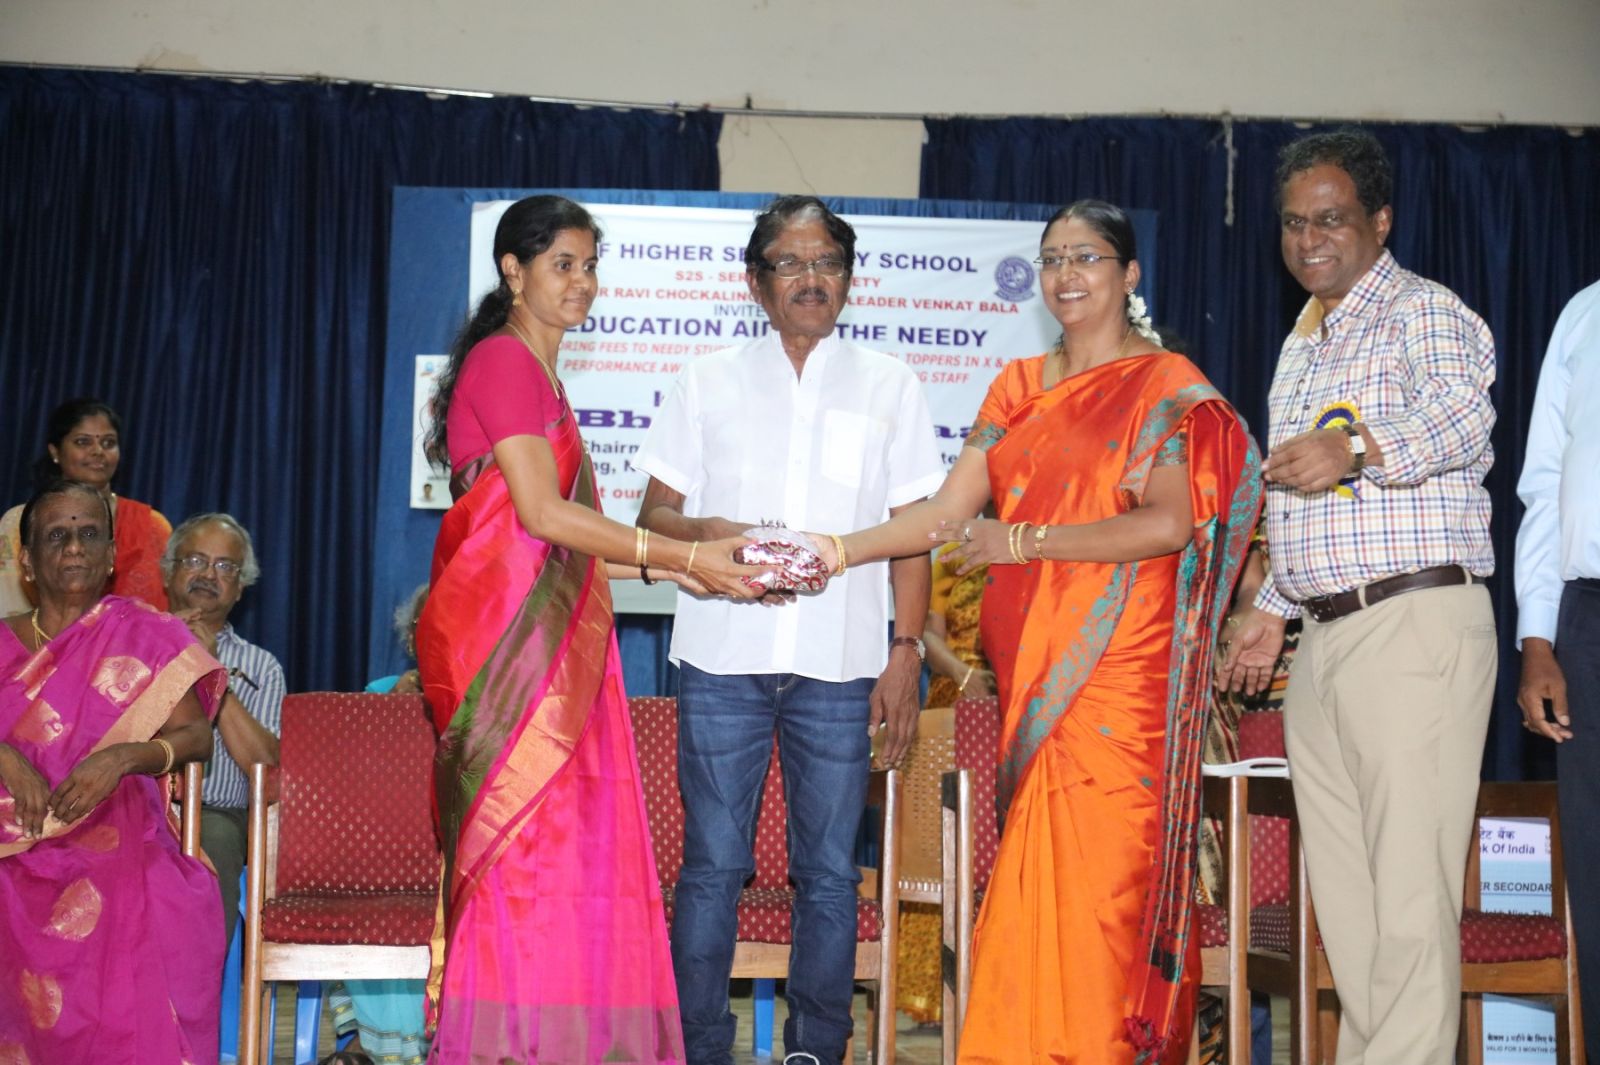 Bharathiraja at Service To Society (S2S) 6th Educational AID Program - ICF Higher Secondary  (52)